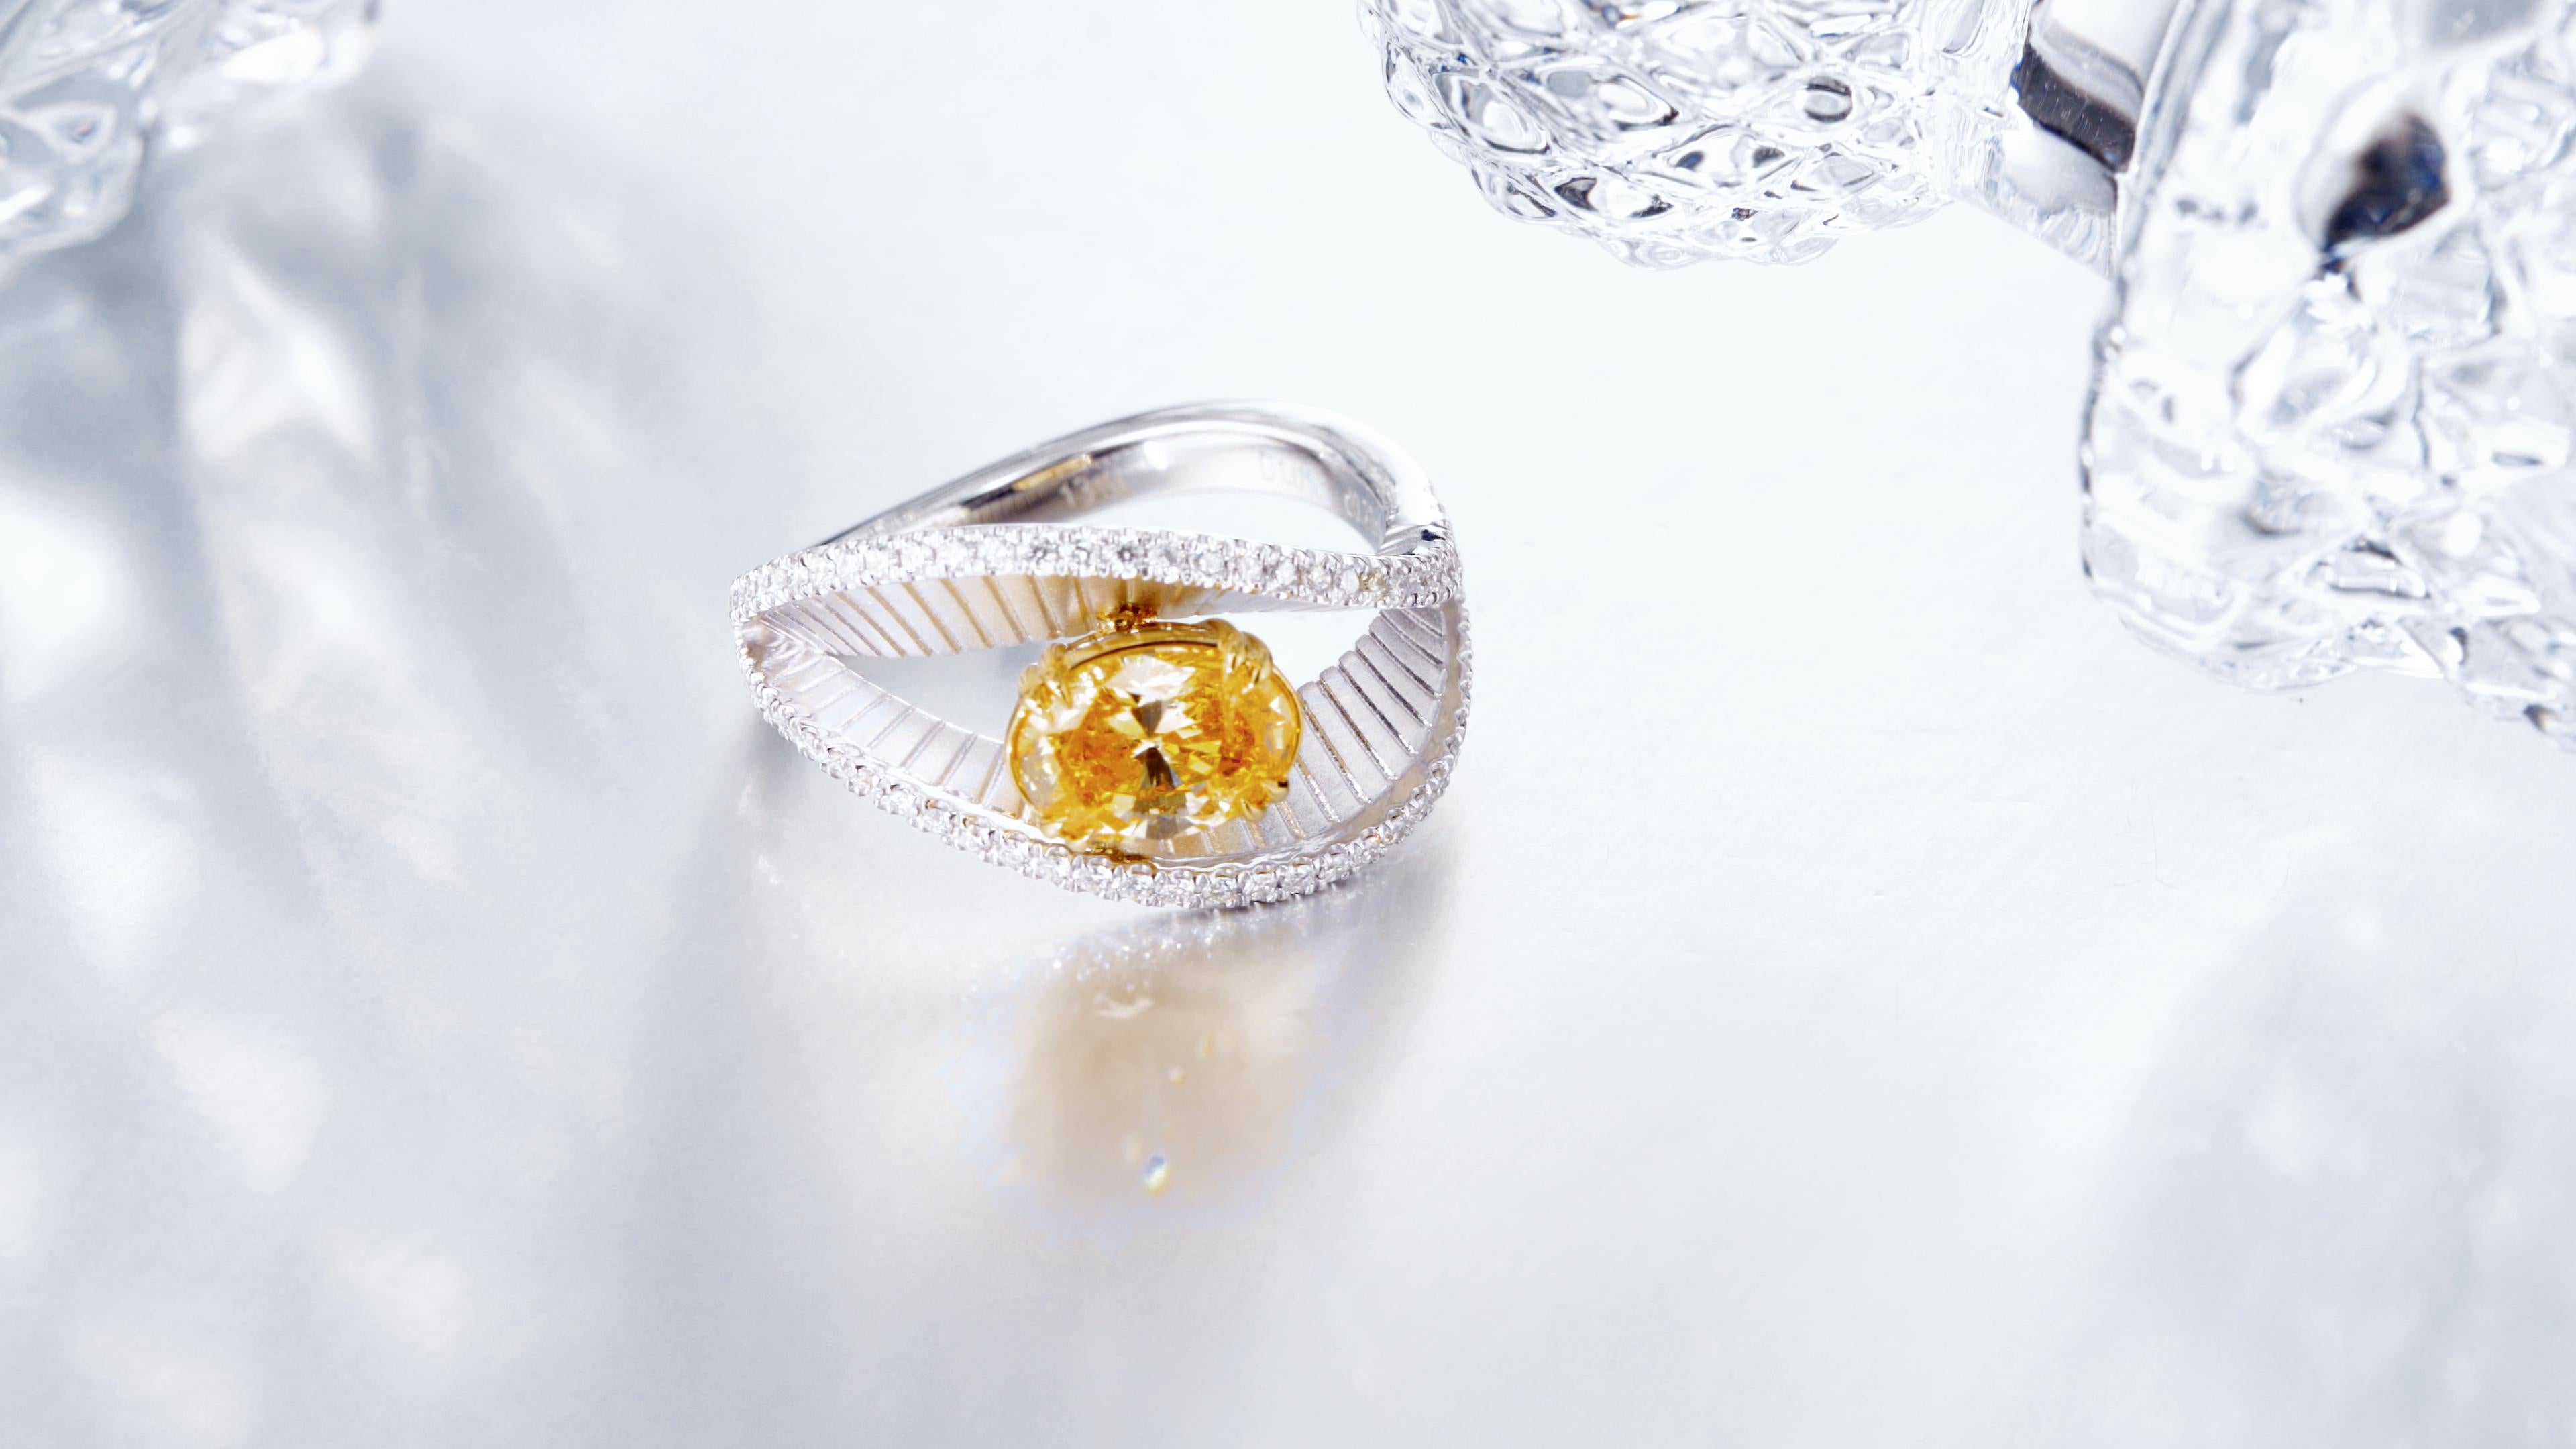 GIA Certified 1.01-carat Natural Fancy Intense Yellow-Orange Oval Diamond Ring set in exquisite 18KT gold. This ring is a testament to rare beauty, featuring a central oval-cut diamond that boasts a captivating blend of intense yellow and orange